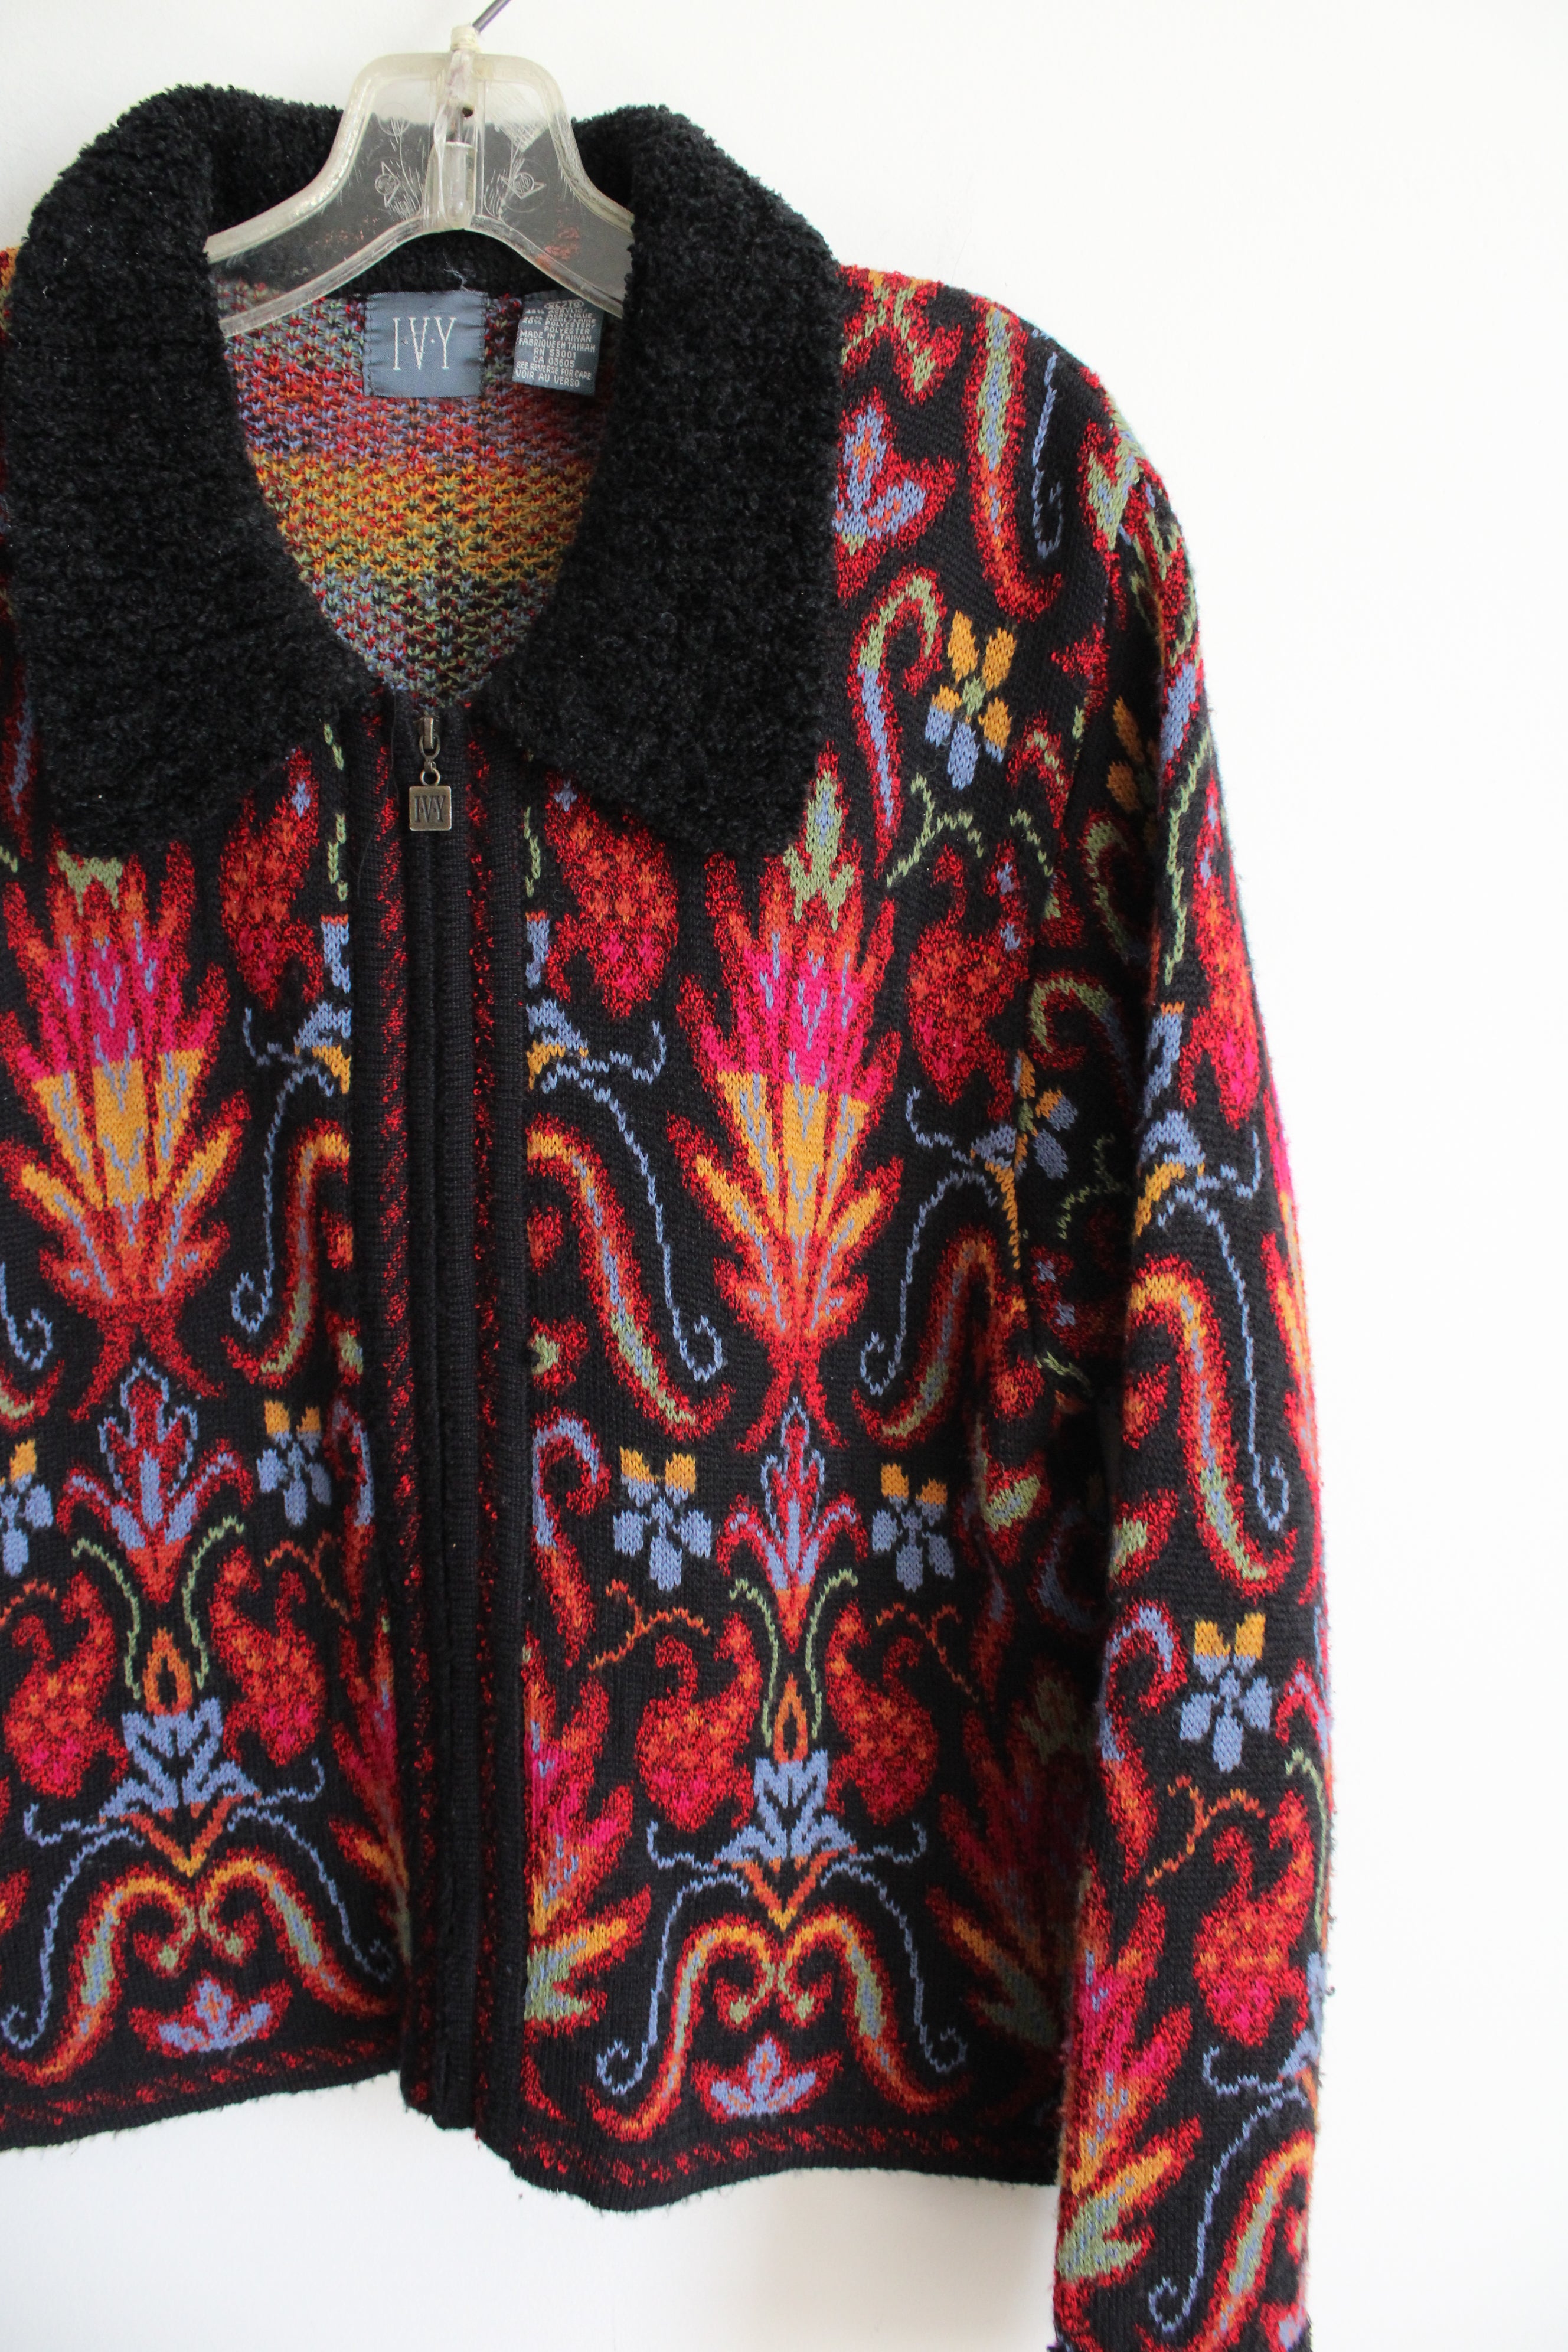 IVY Red Patterned Knit Zip Up Sweater Jacket | XL